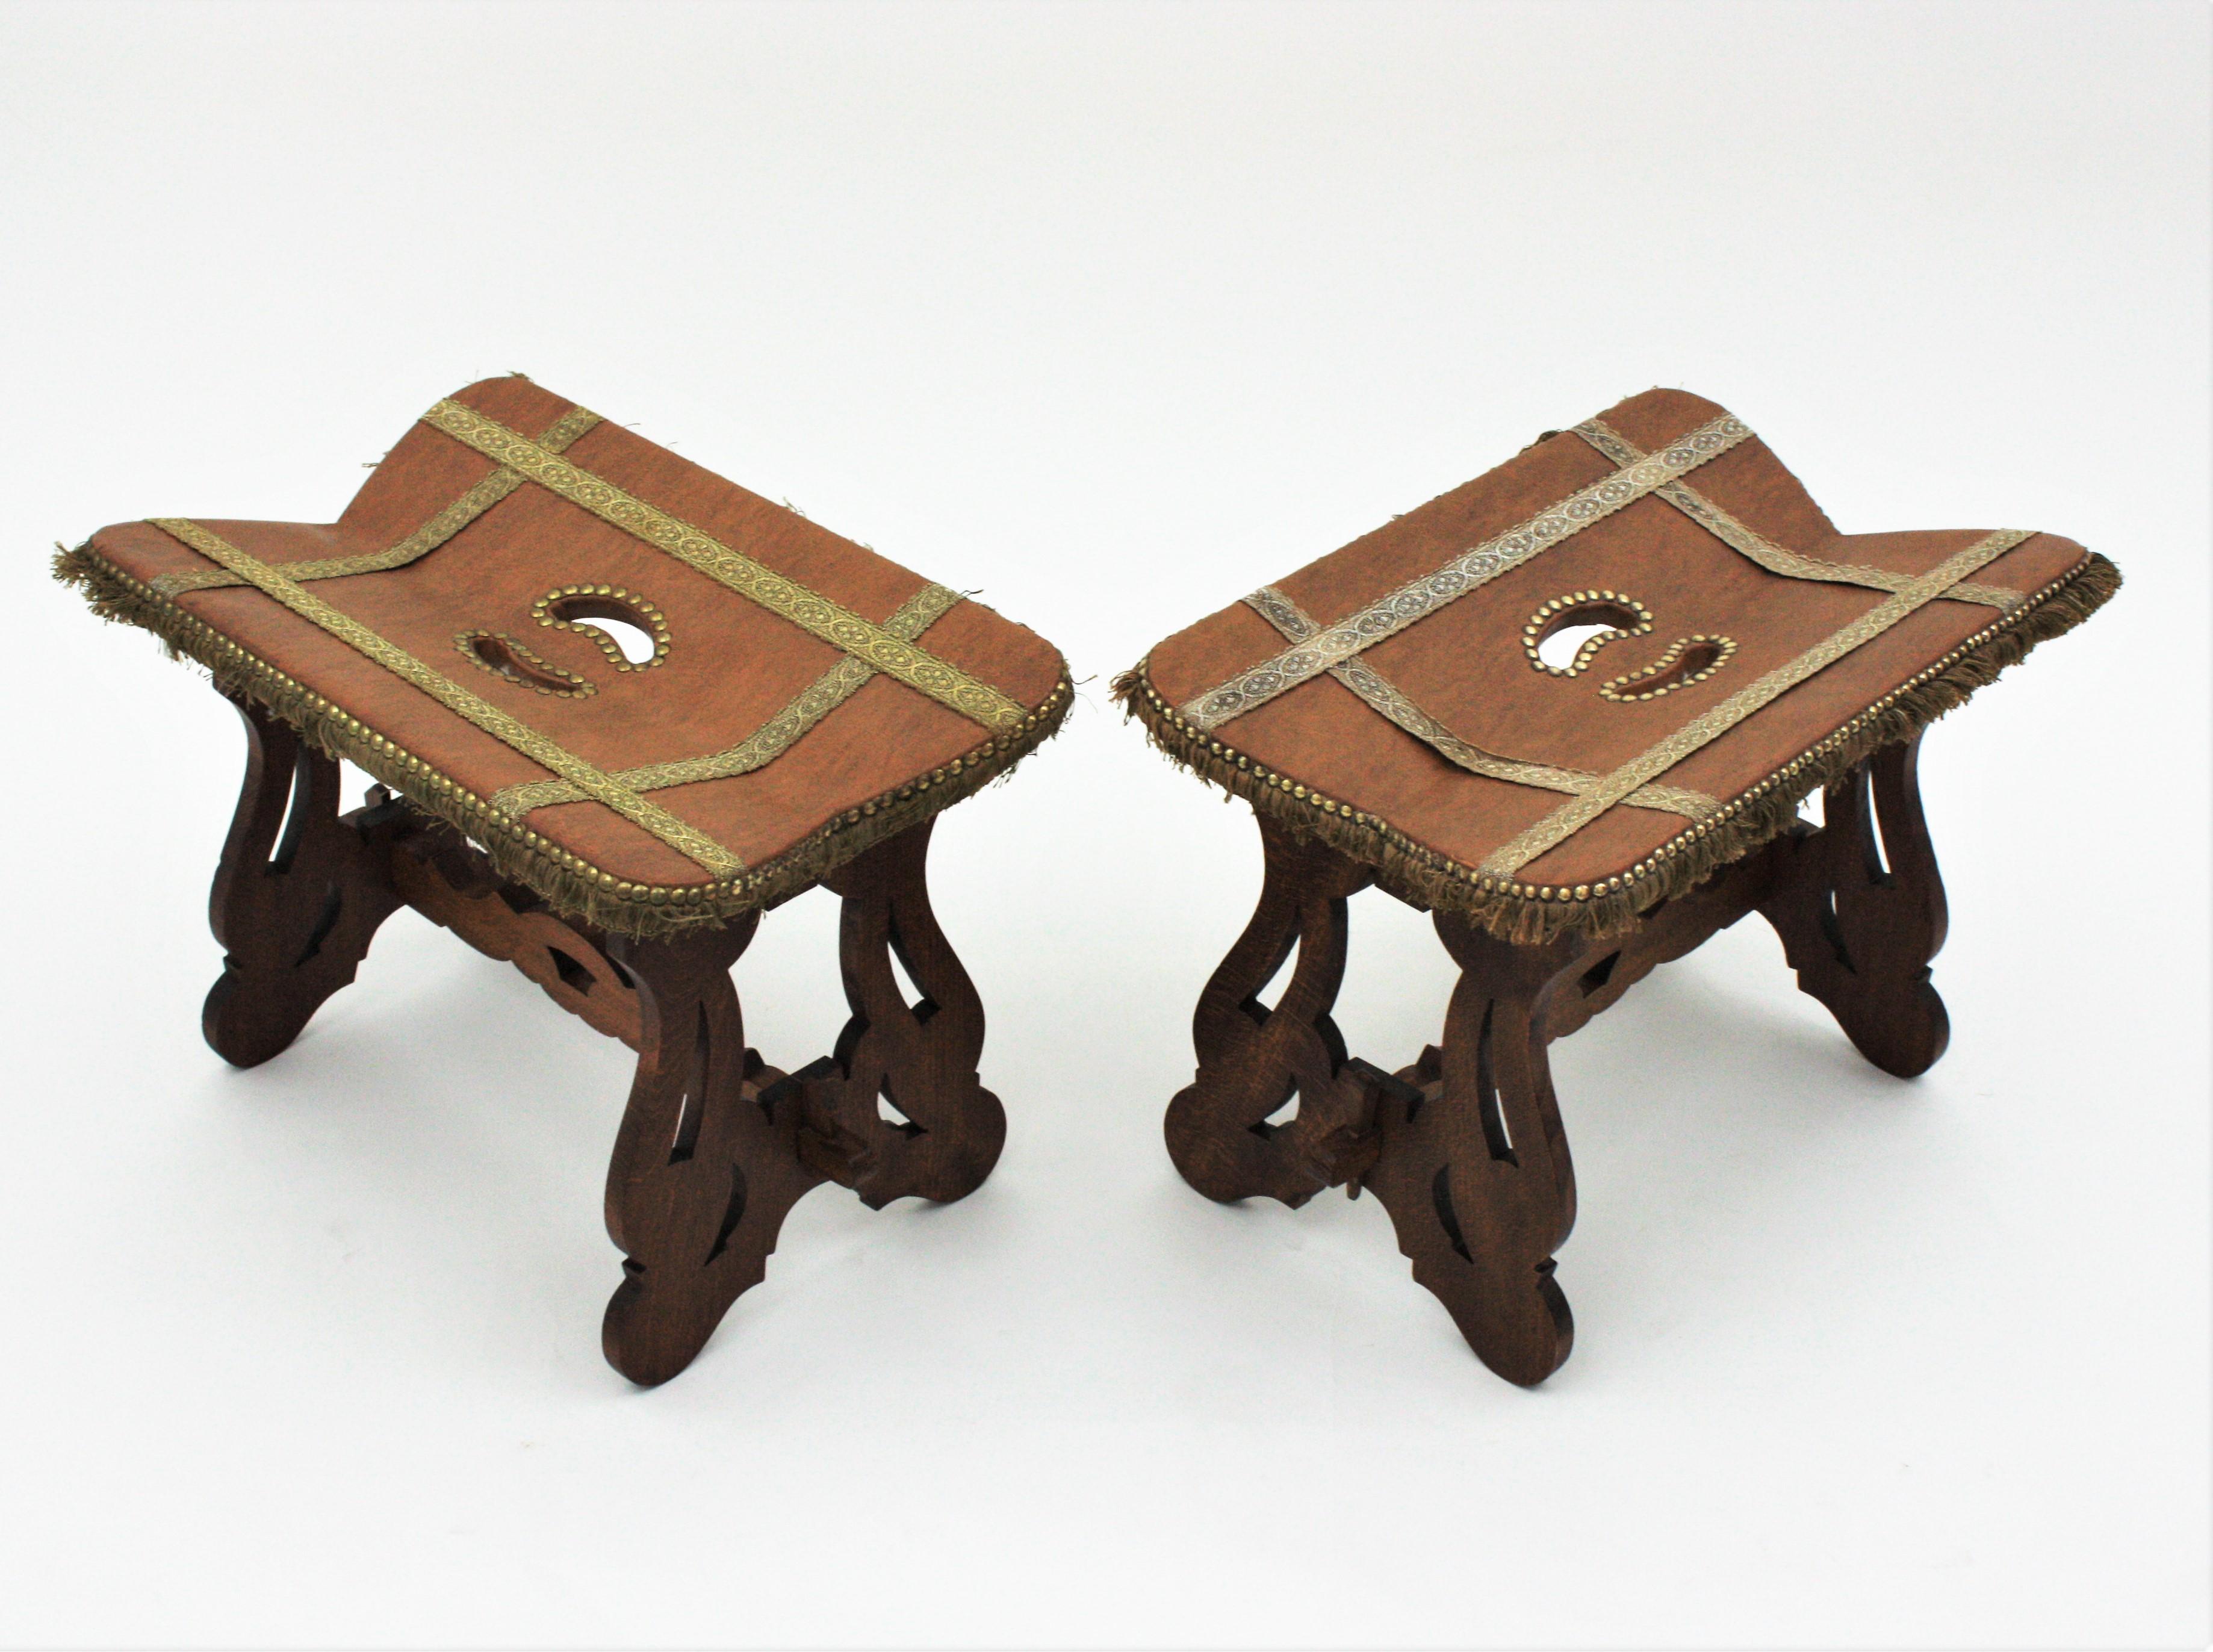 Pair of Spanish Stools in Wood and Leatherette, 1950s For Sale 5